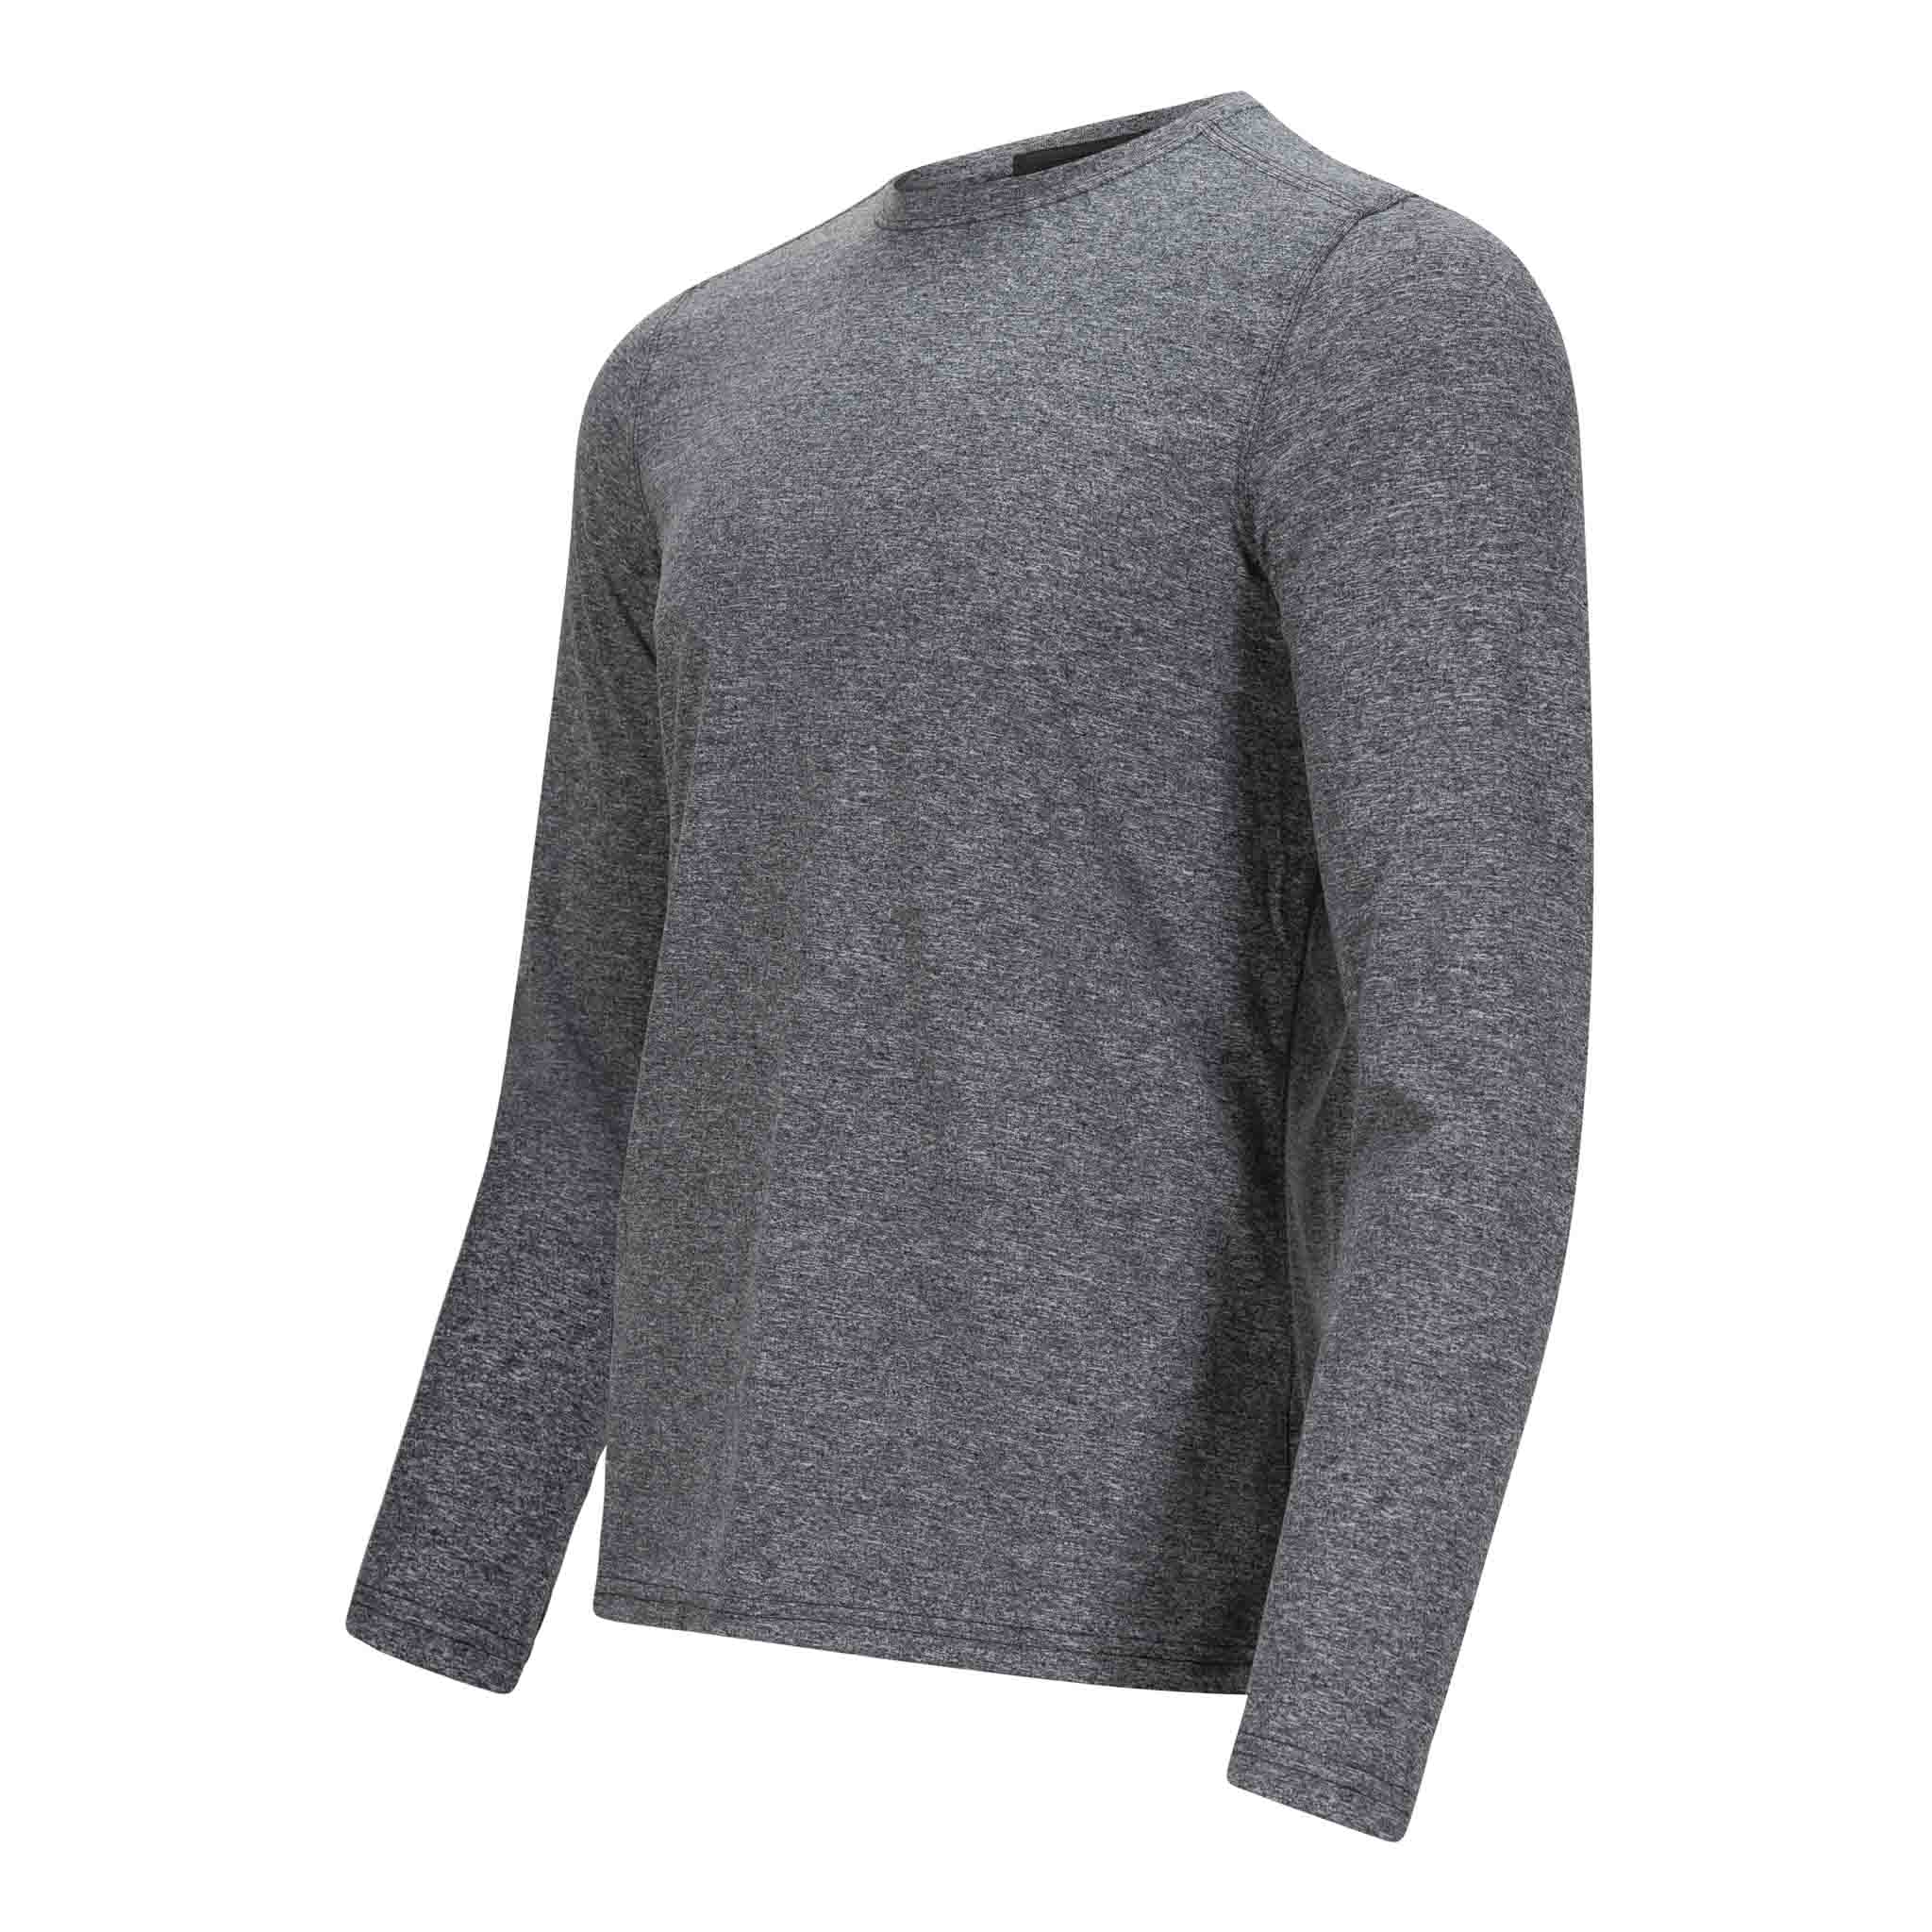 sync-performance-mens-deluge-long-sleeve-grey-heather-side